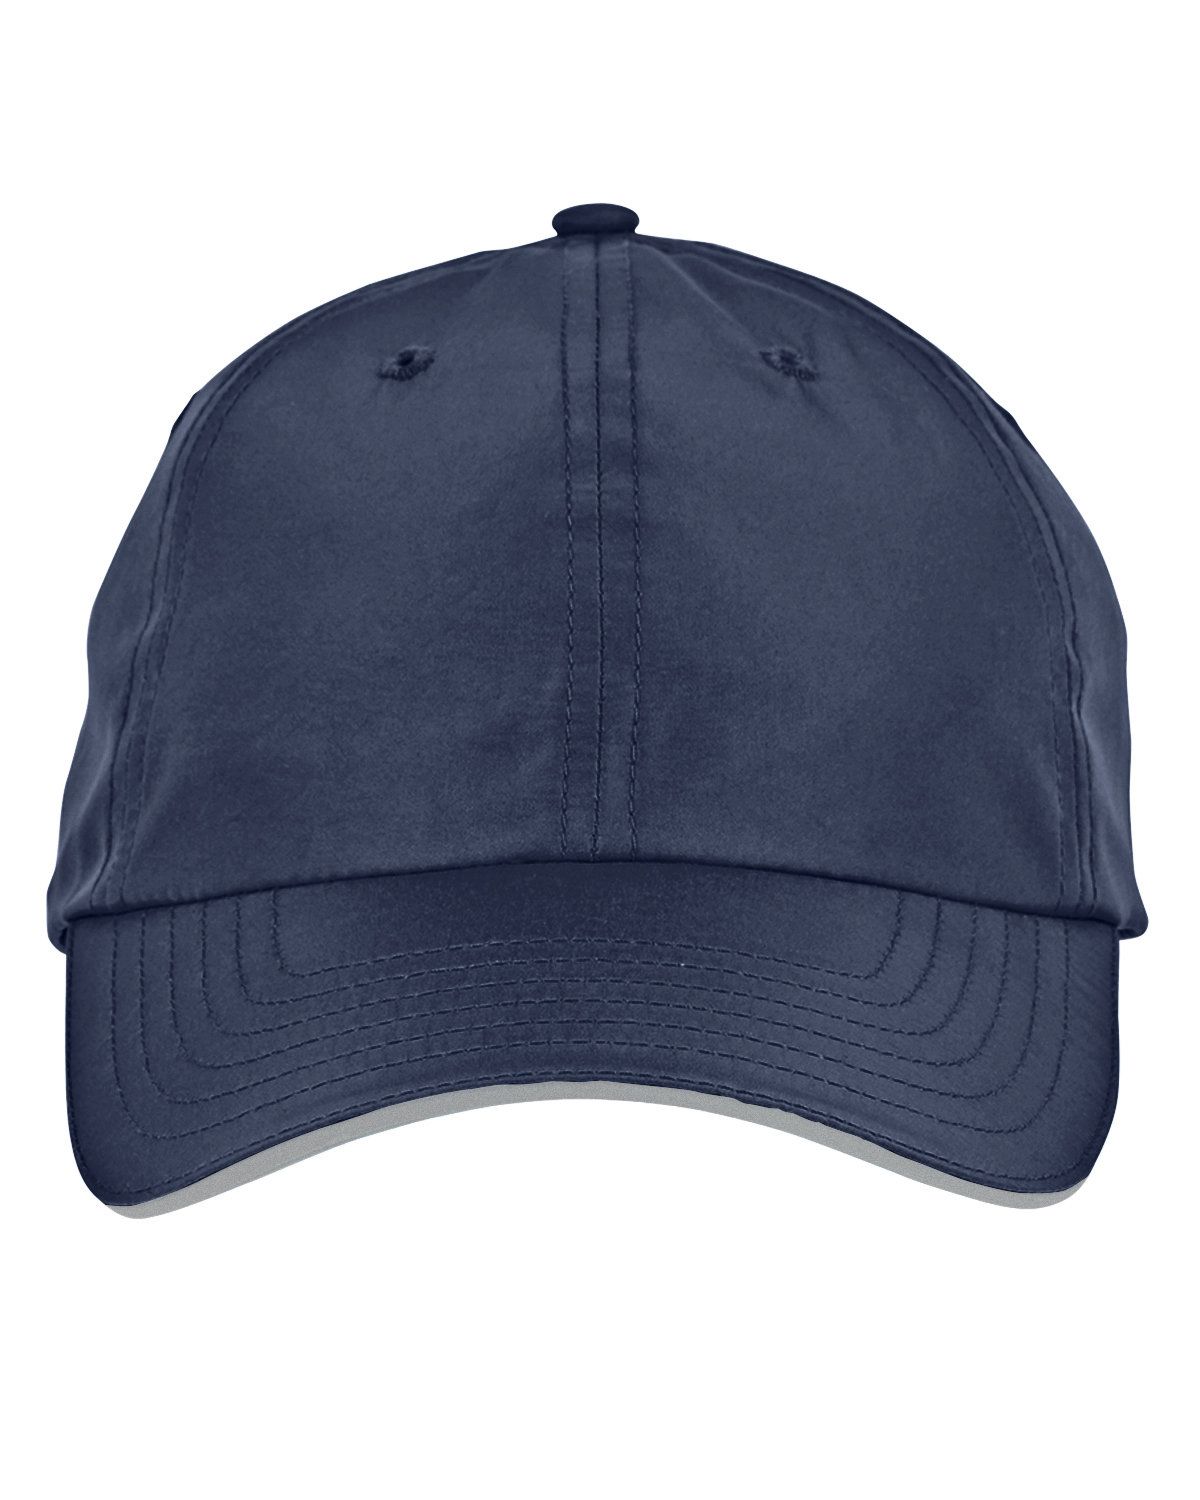 Core 365 Adult Pitch Performance Cap CLASSIC NAVY 